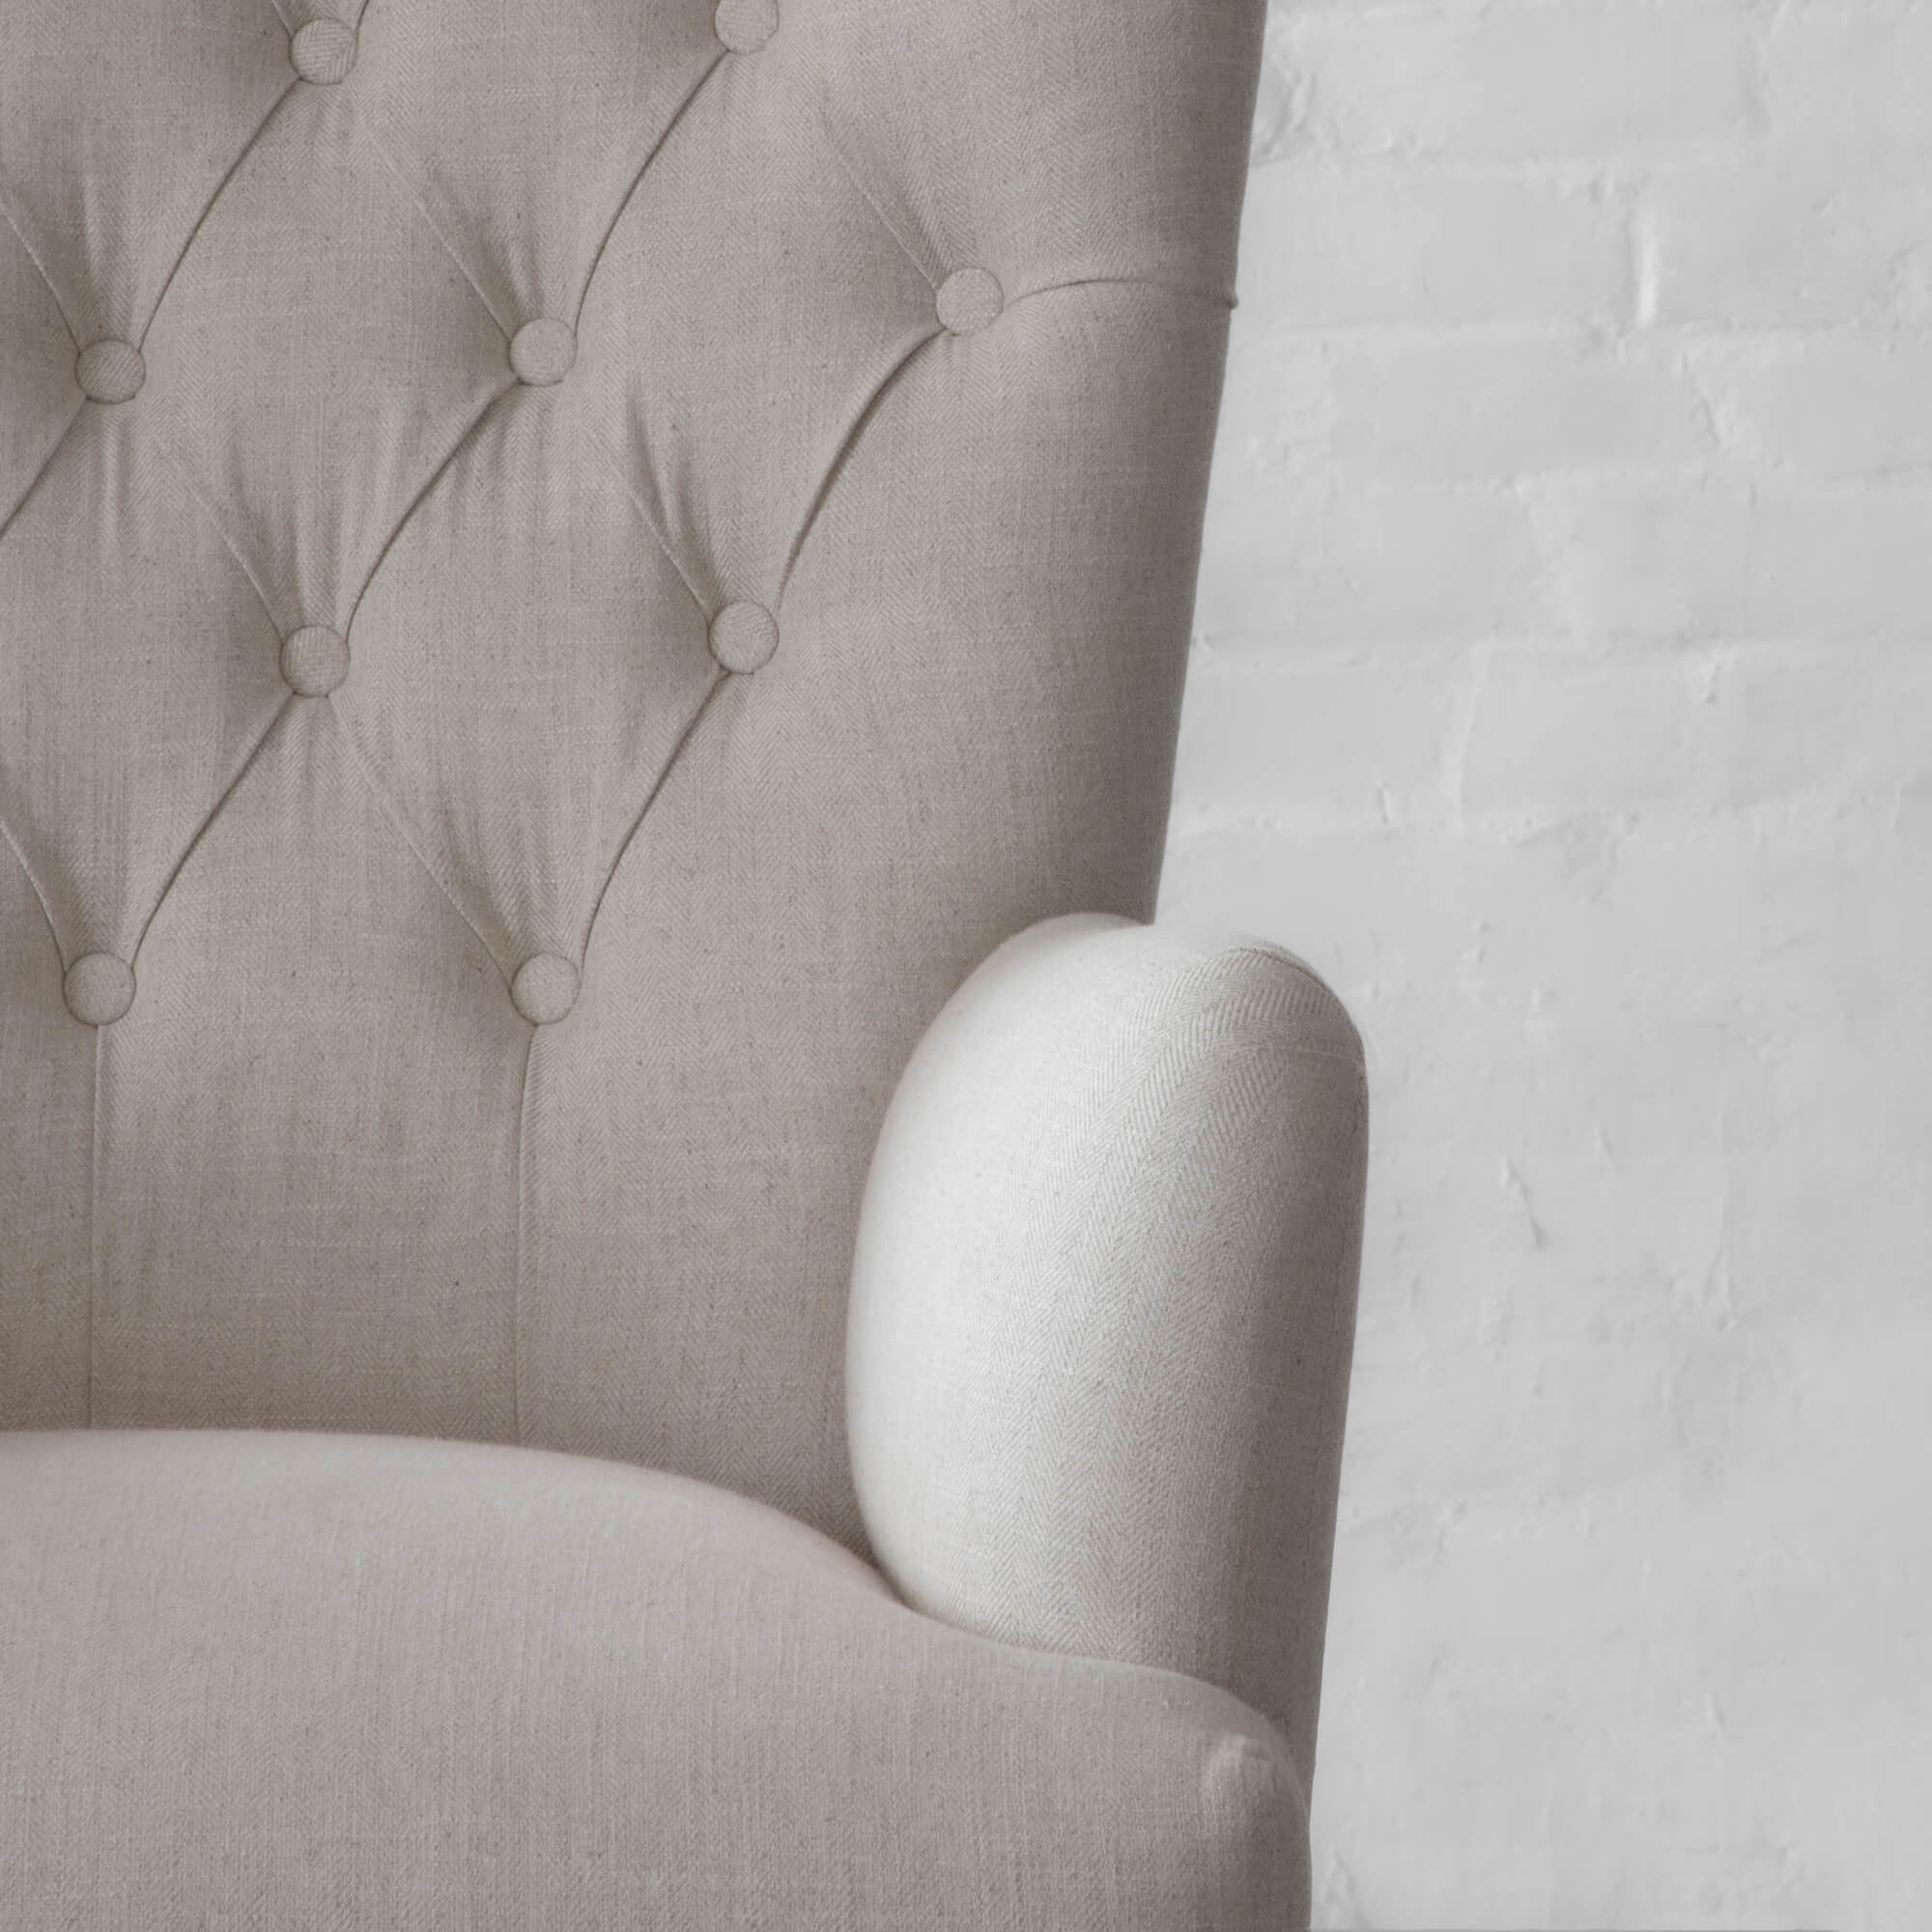 Melbourne Tufted Fabric Armchair